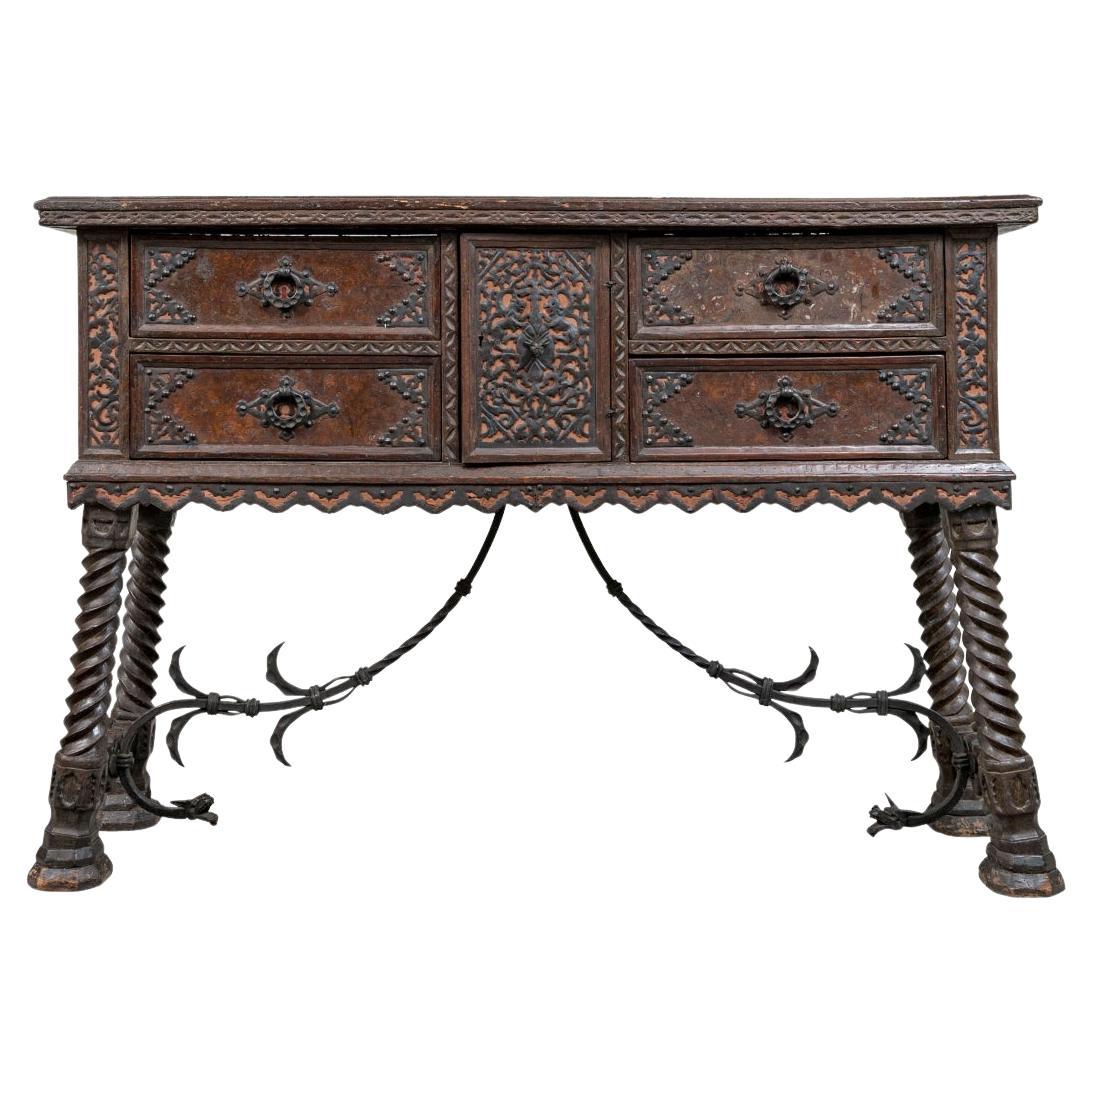 Rare 17th/18th Century Spanish Carved Buffet With Iron Mounts